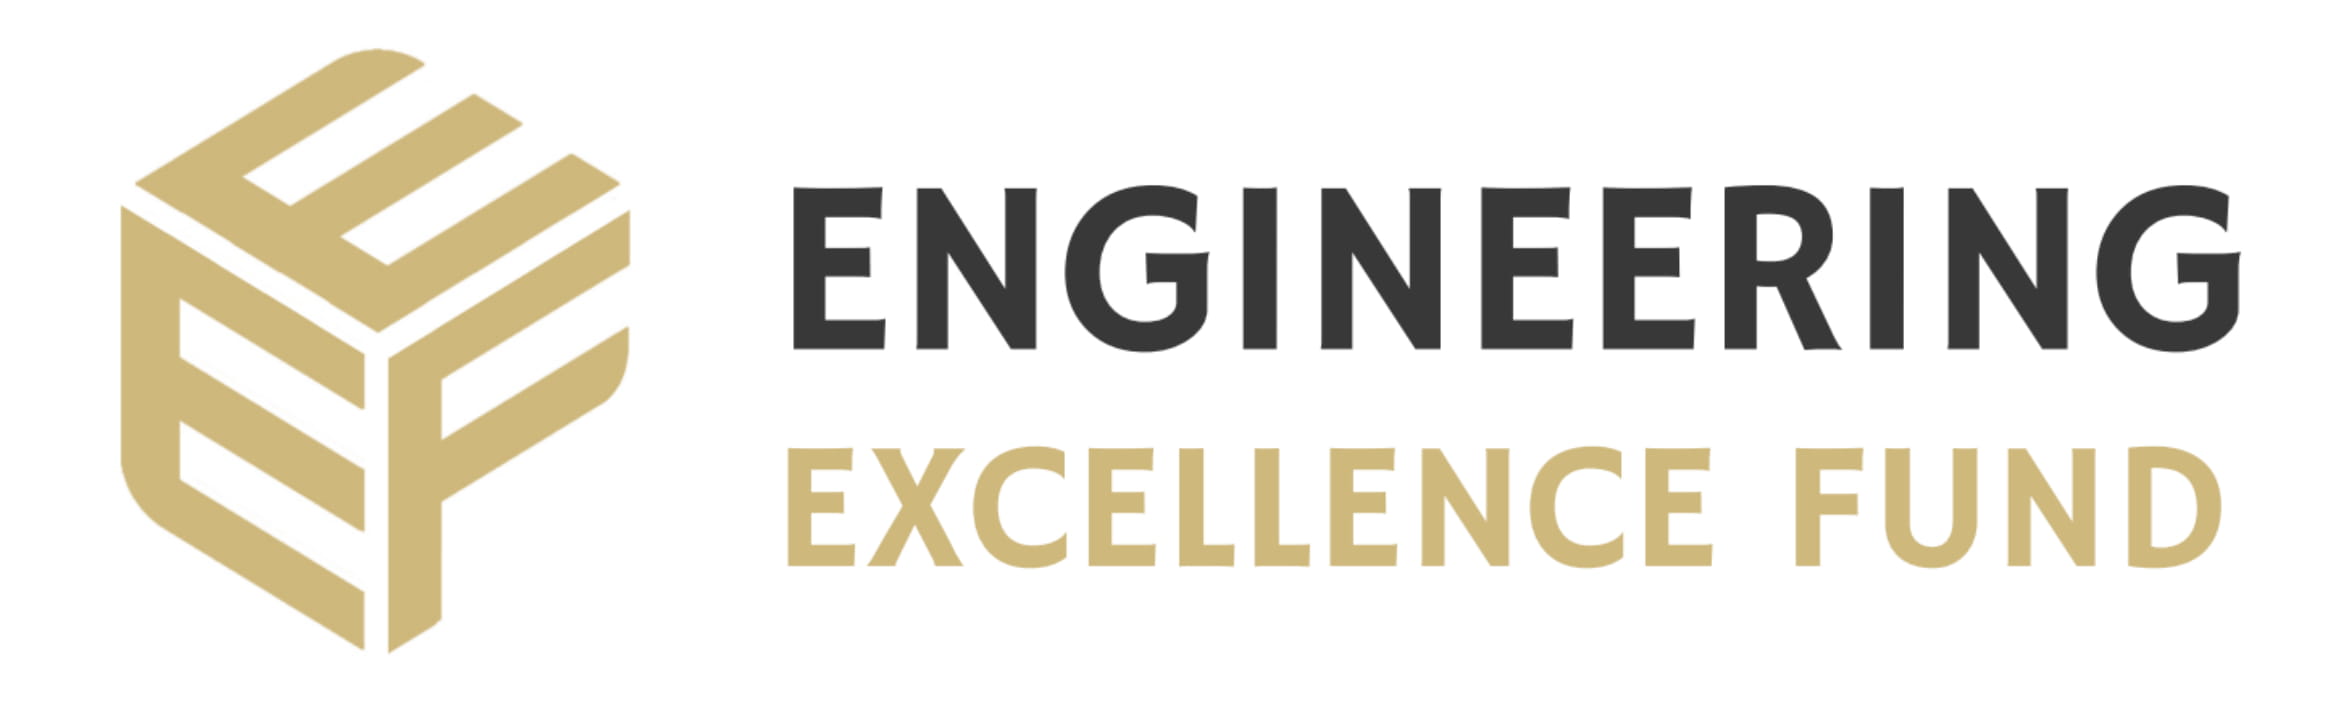 Engineering Excellence Fund